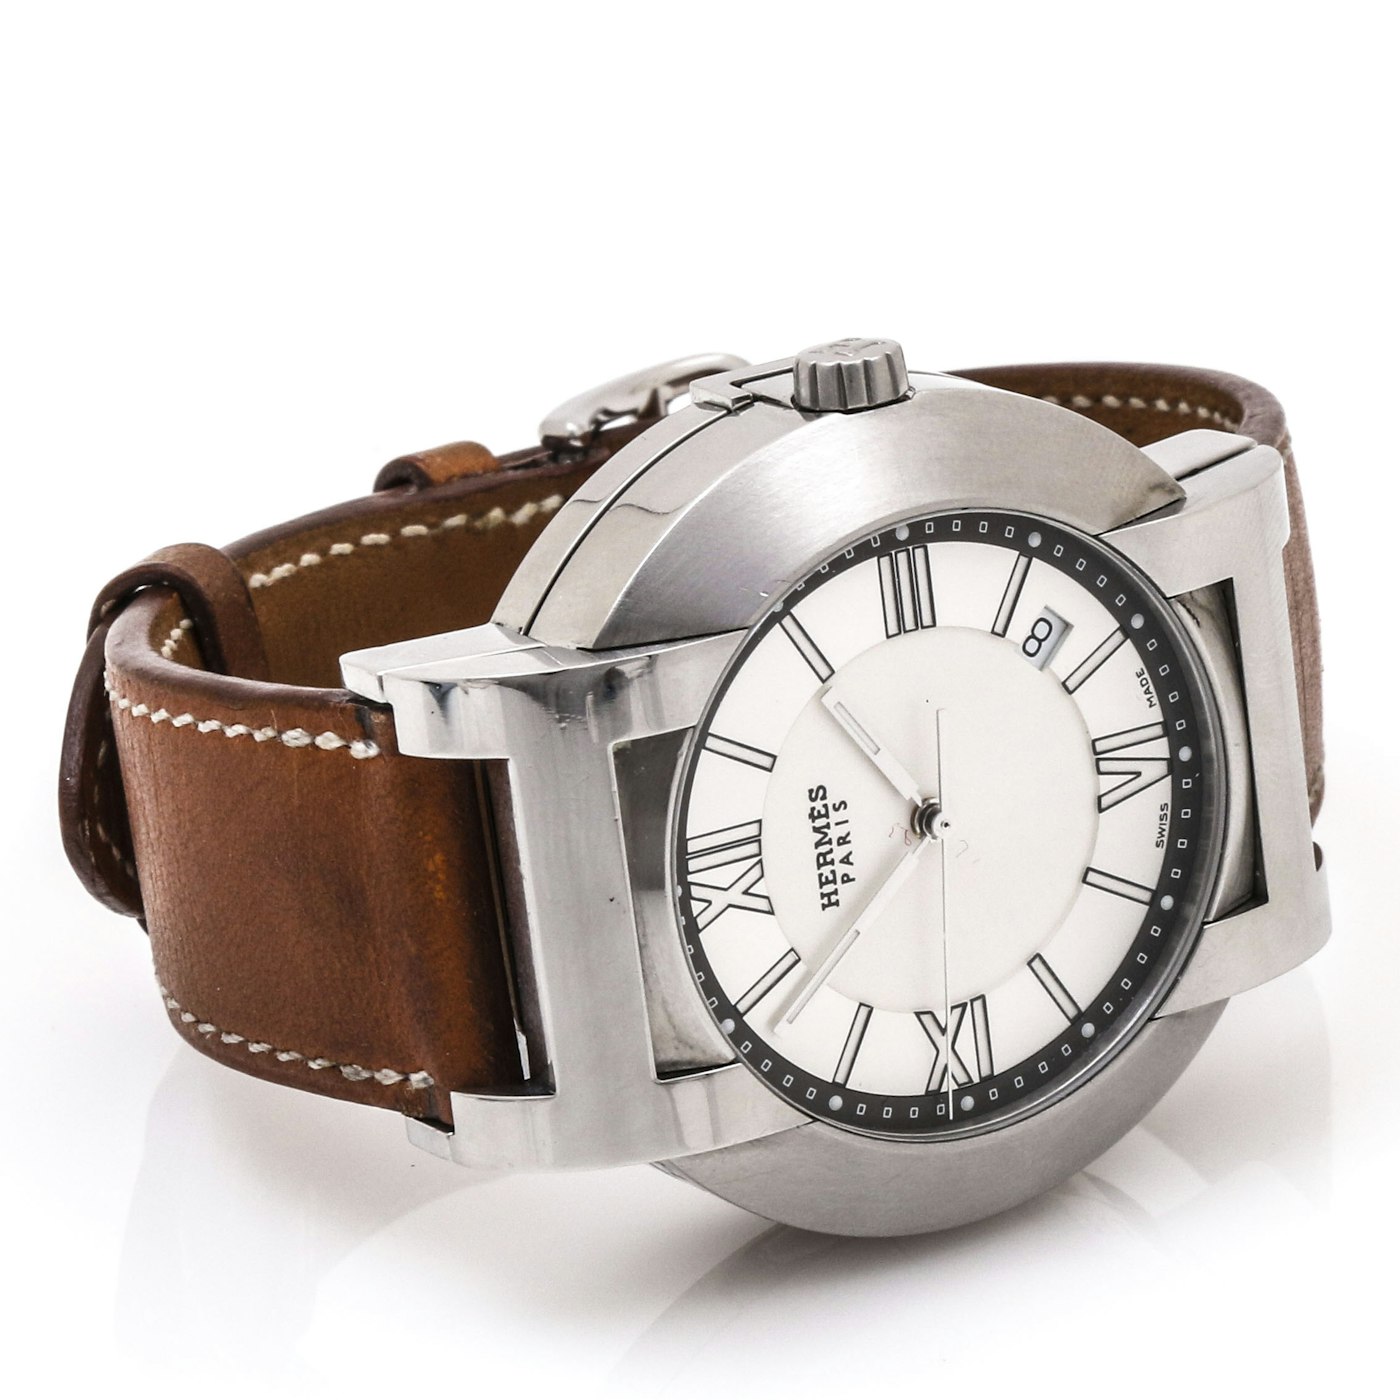 Hermes “Nomade” Stainless Steel Automatic Wristwatch With Compass | EBTH